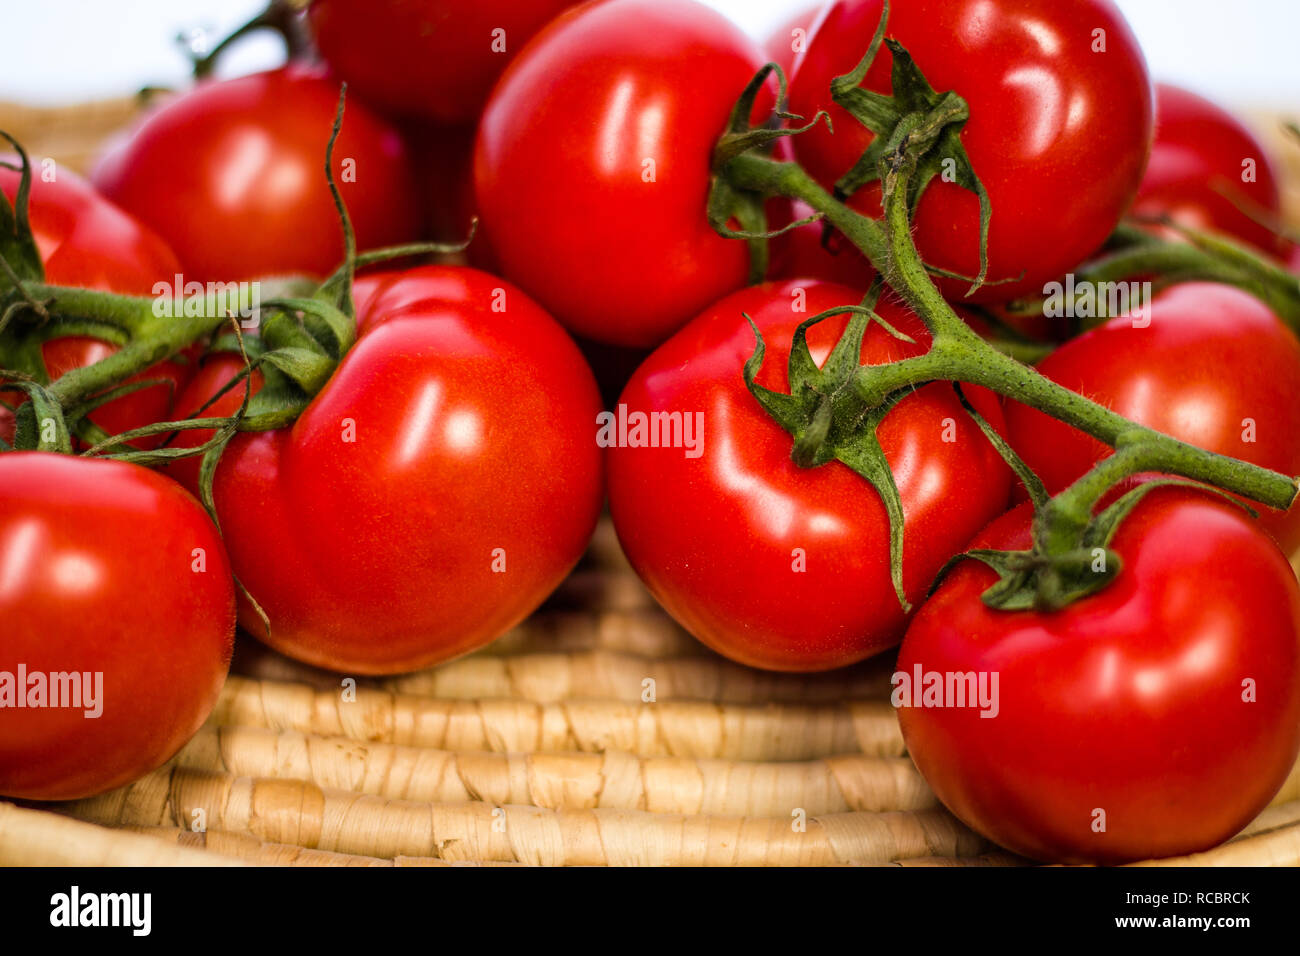 Tomato clusters on the vine. Stock Photo